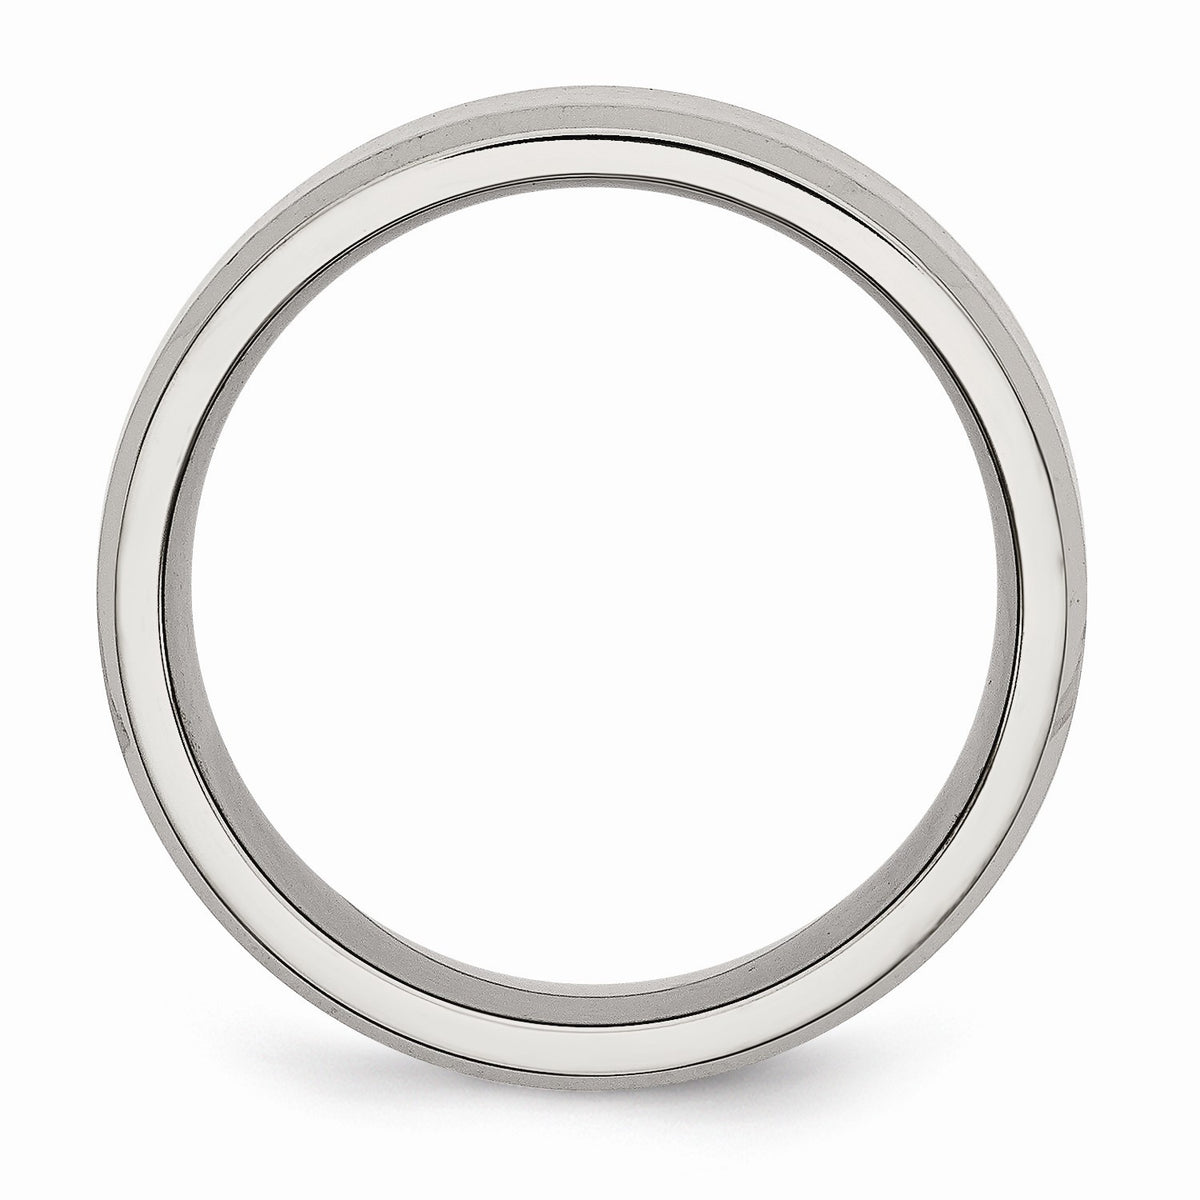 Alternate view of the Stainless Steel Flat Beveled Edge 8mm Comfort Fit Band by The Black Bow Jewelry Co.